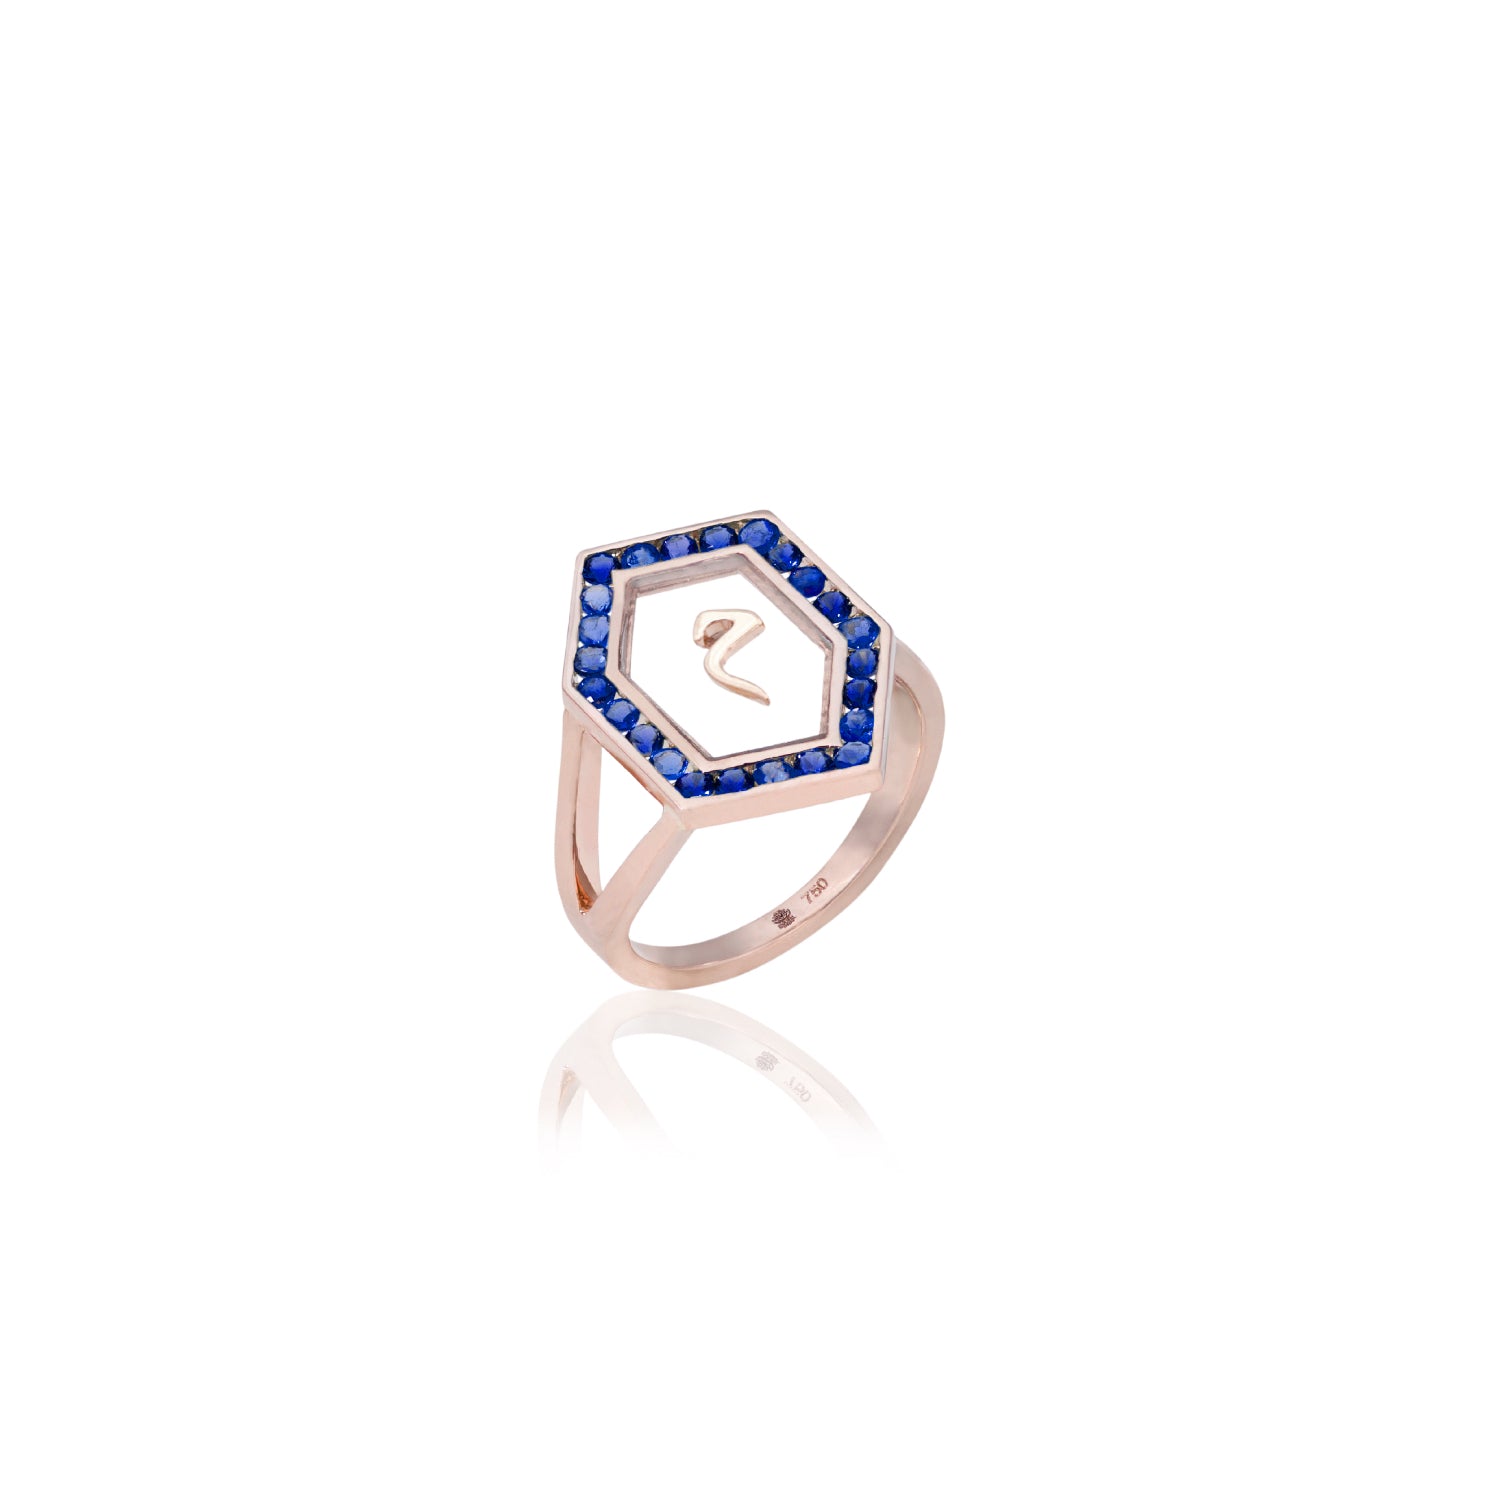 Qamoos 1.0 Letter م Sapphire Ring in Rose Gold